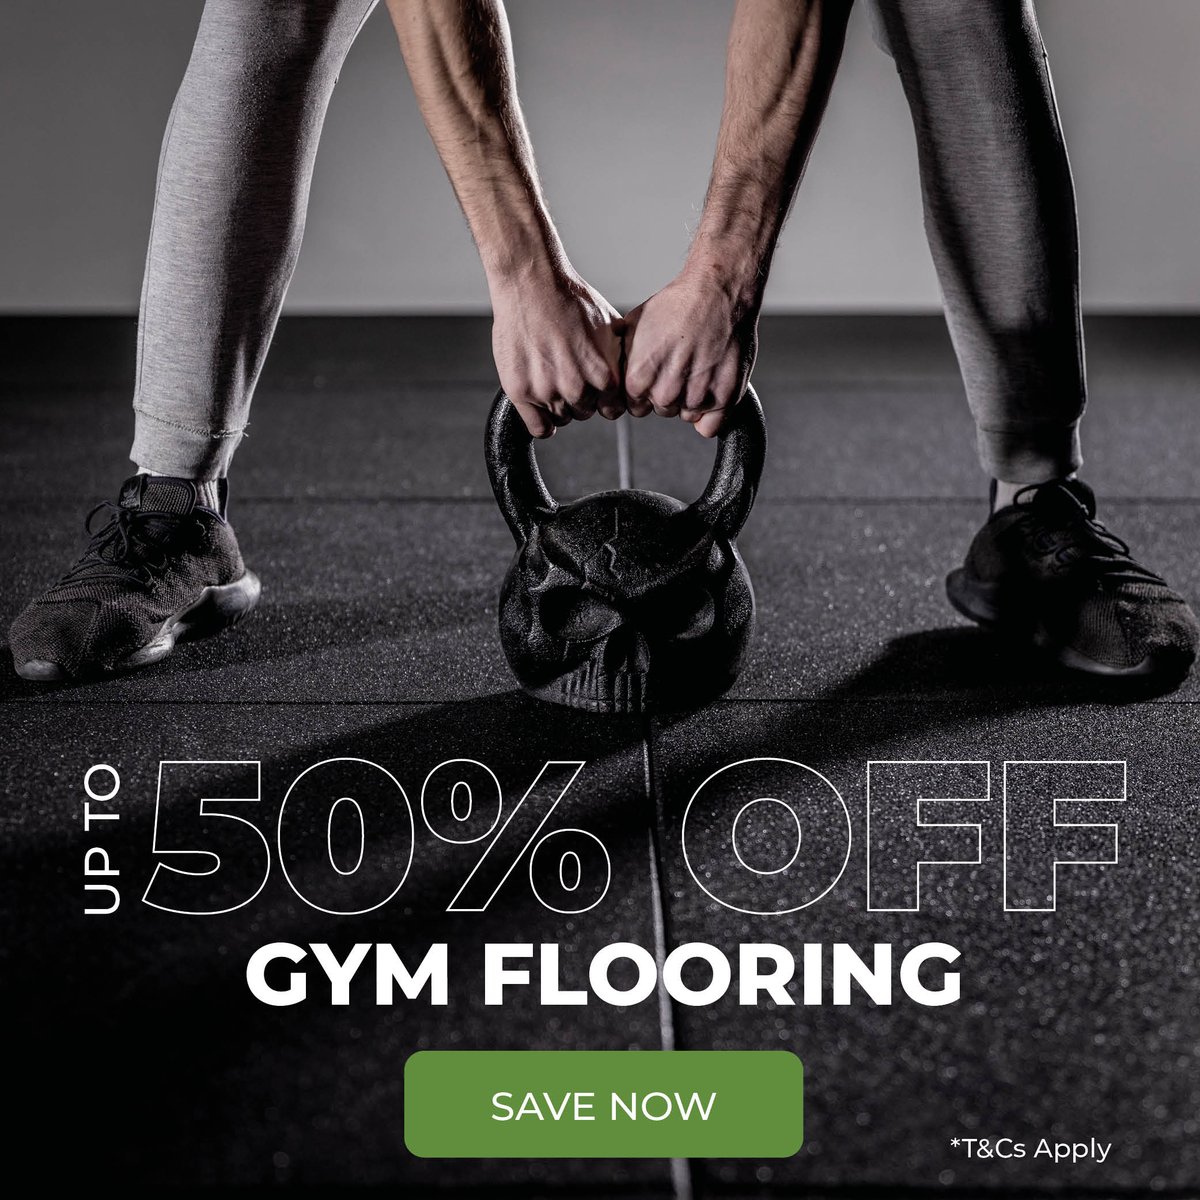 Turkey, trimmings, and tremendous savings! 💪 Upgrade your space, elevate your workouts and save up to 50% across our range of gym and leisure flooring. Be quick, these offers are only valid for a limited time! 🛒: bit.ly/470RXbT